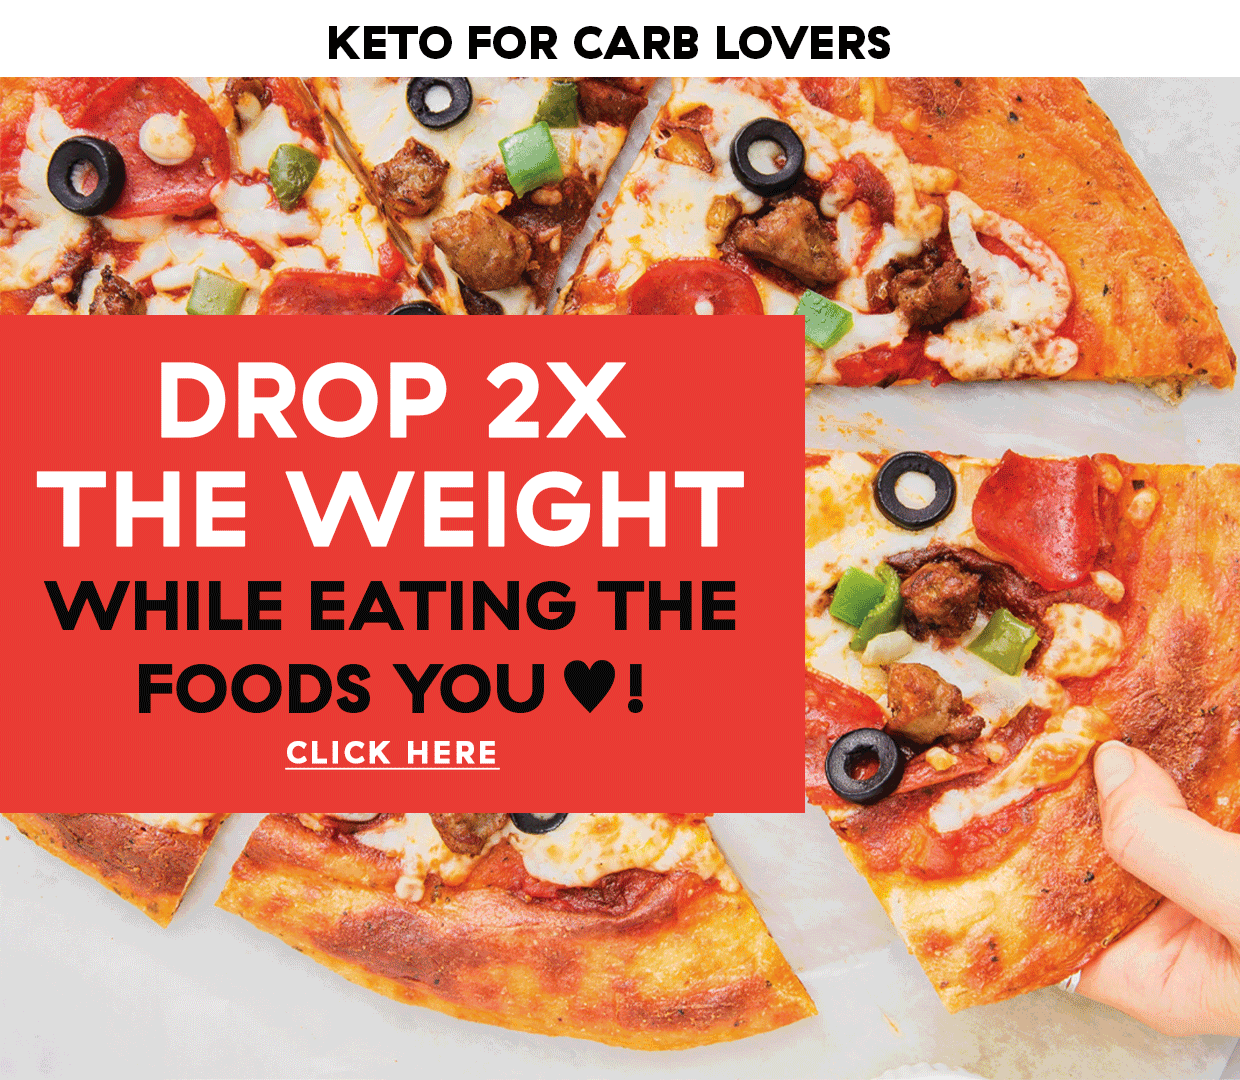 Drop 2X’s the Weight Eating Foods You Love!